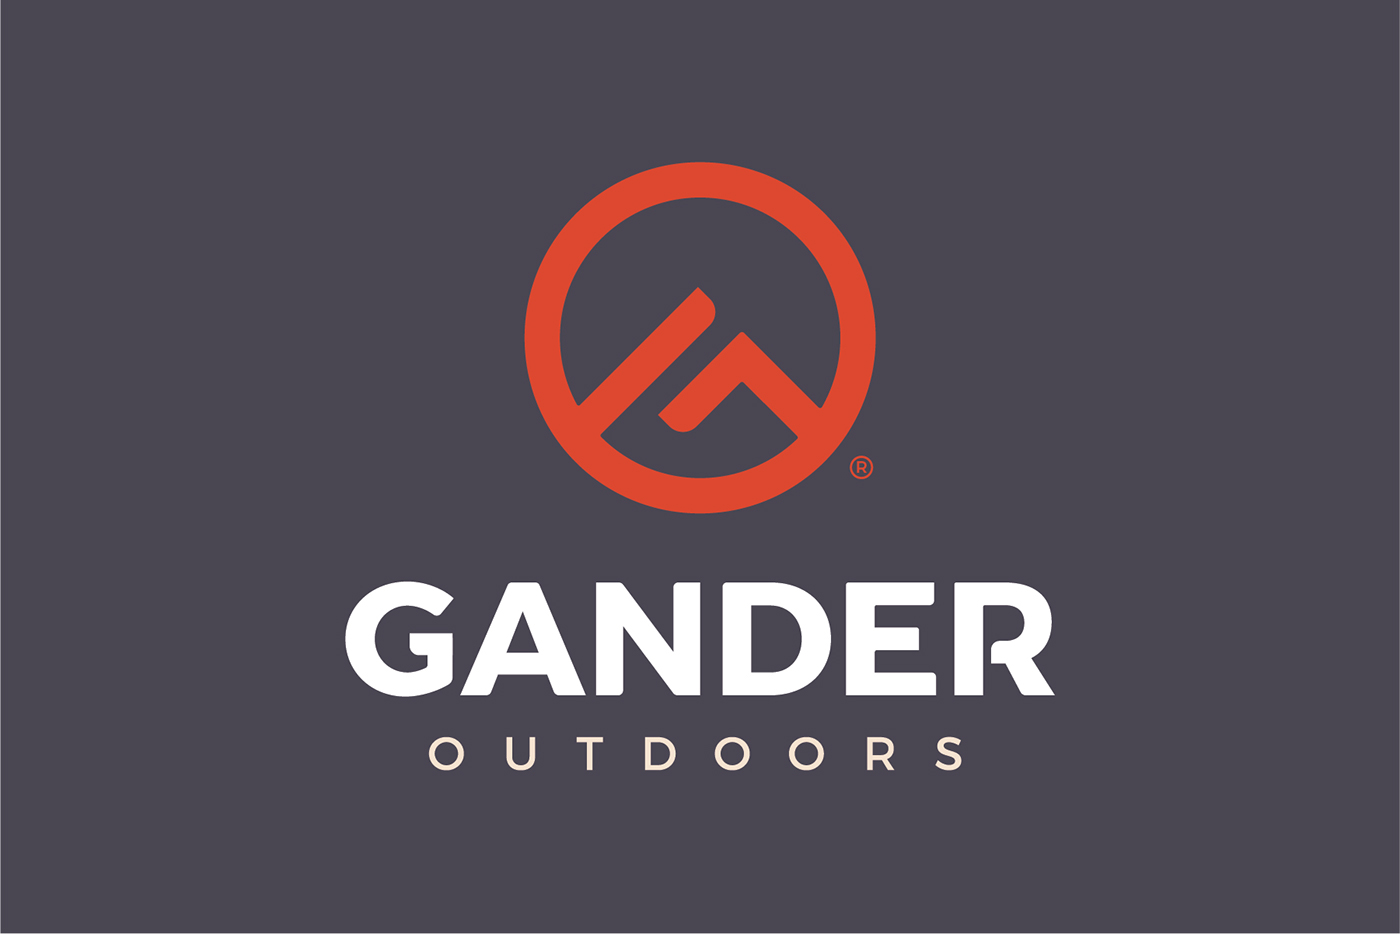 national outdoor and hunting store Gander Mountain was renamed to Gander Ou...